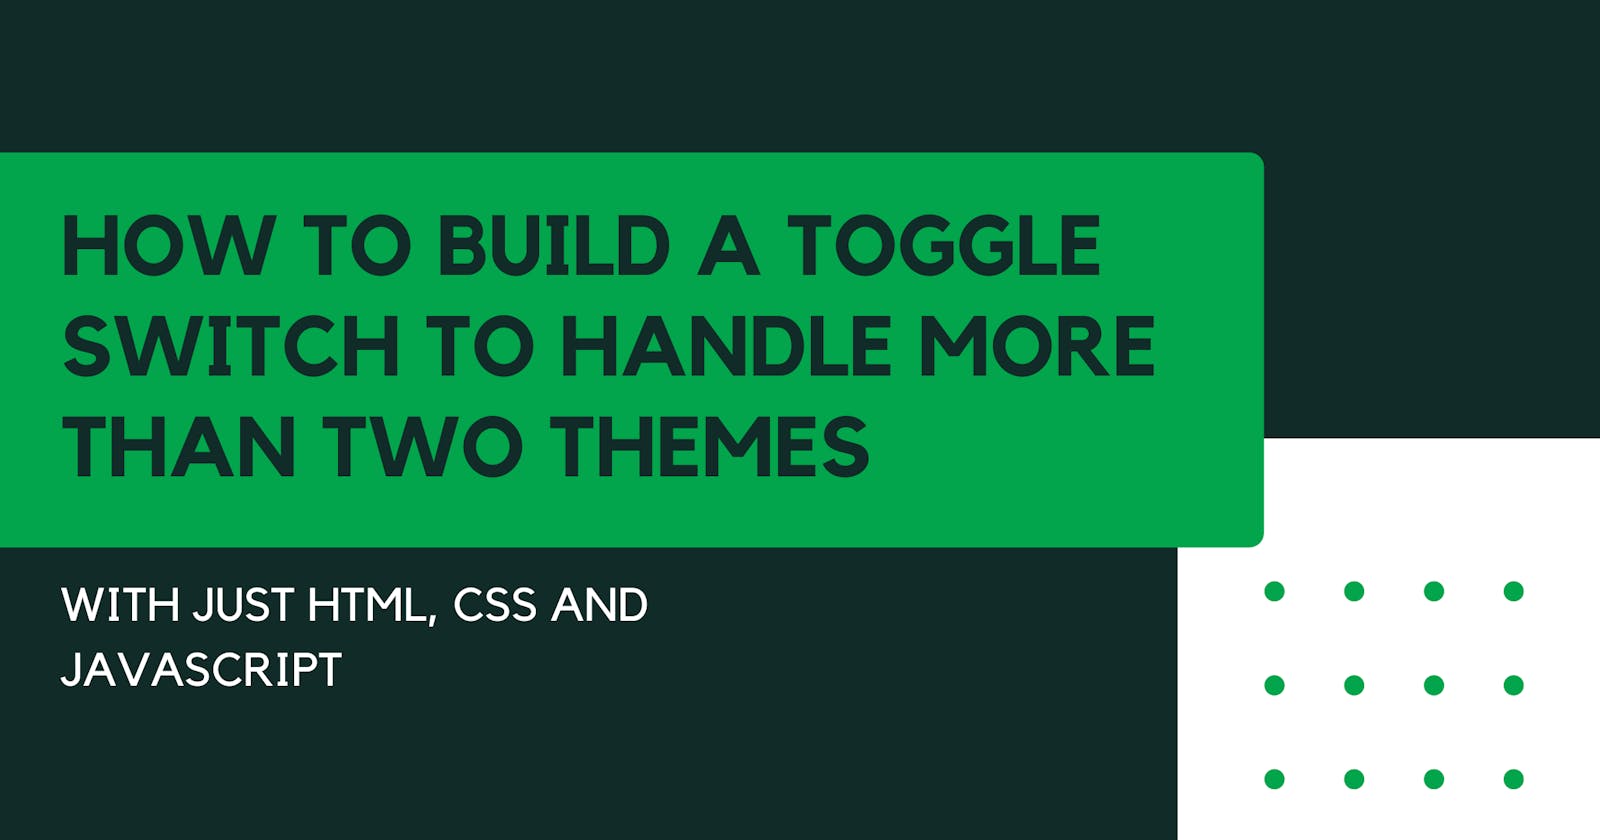 How To Build A Toggle Switch To Handle More Than Two Themes with just HTML, CSS And Javascript